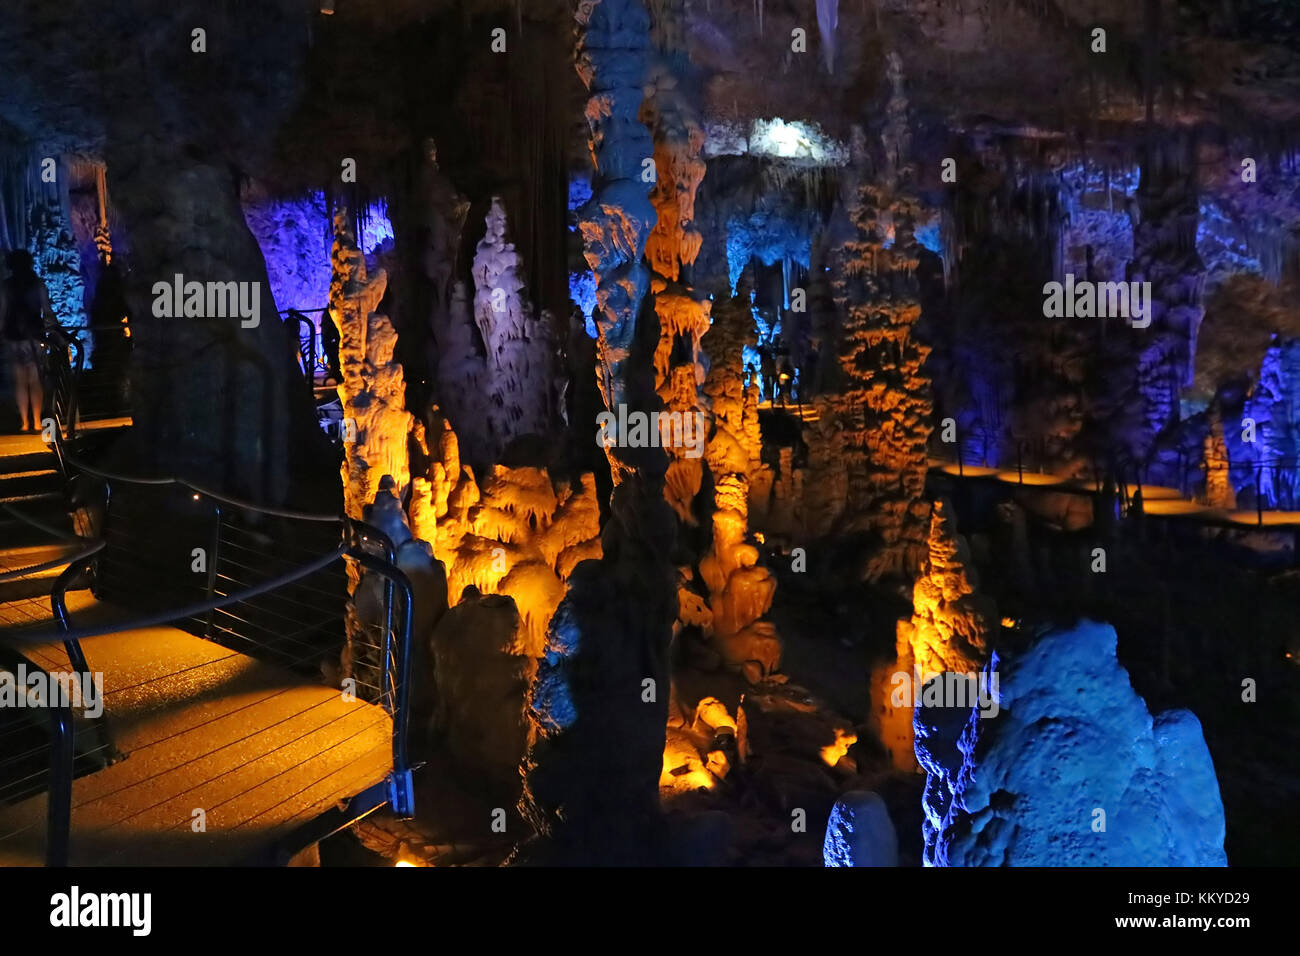 BEIT-SHEMESH, ISRAEL - SEPTEMBER 23, 2017: Avshalom Cave, also known as Soreq Cave, a large stalactites cave near Beit-Shemesh in central Israel Stock Photo